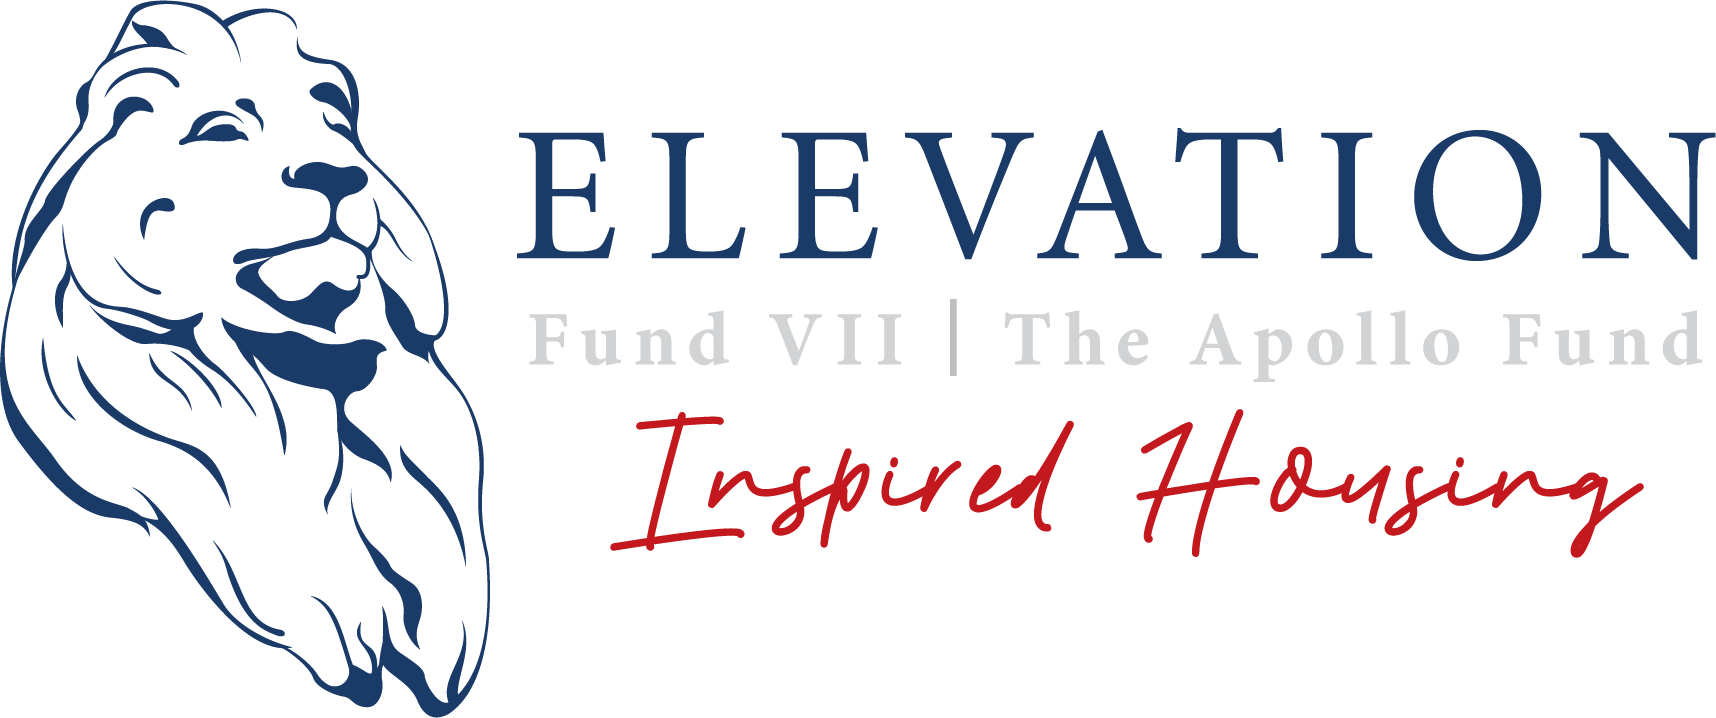 Elevation Raises $43.4 Million in its Seventh Fundraise